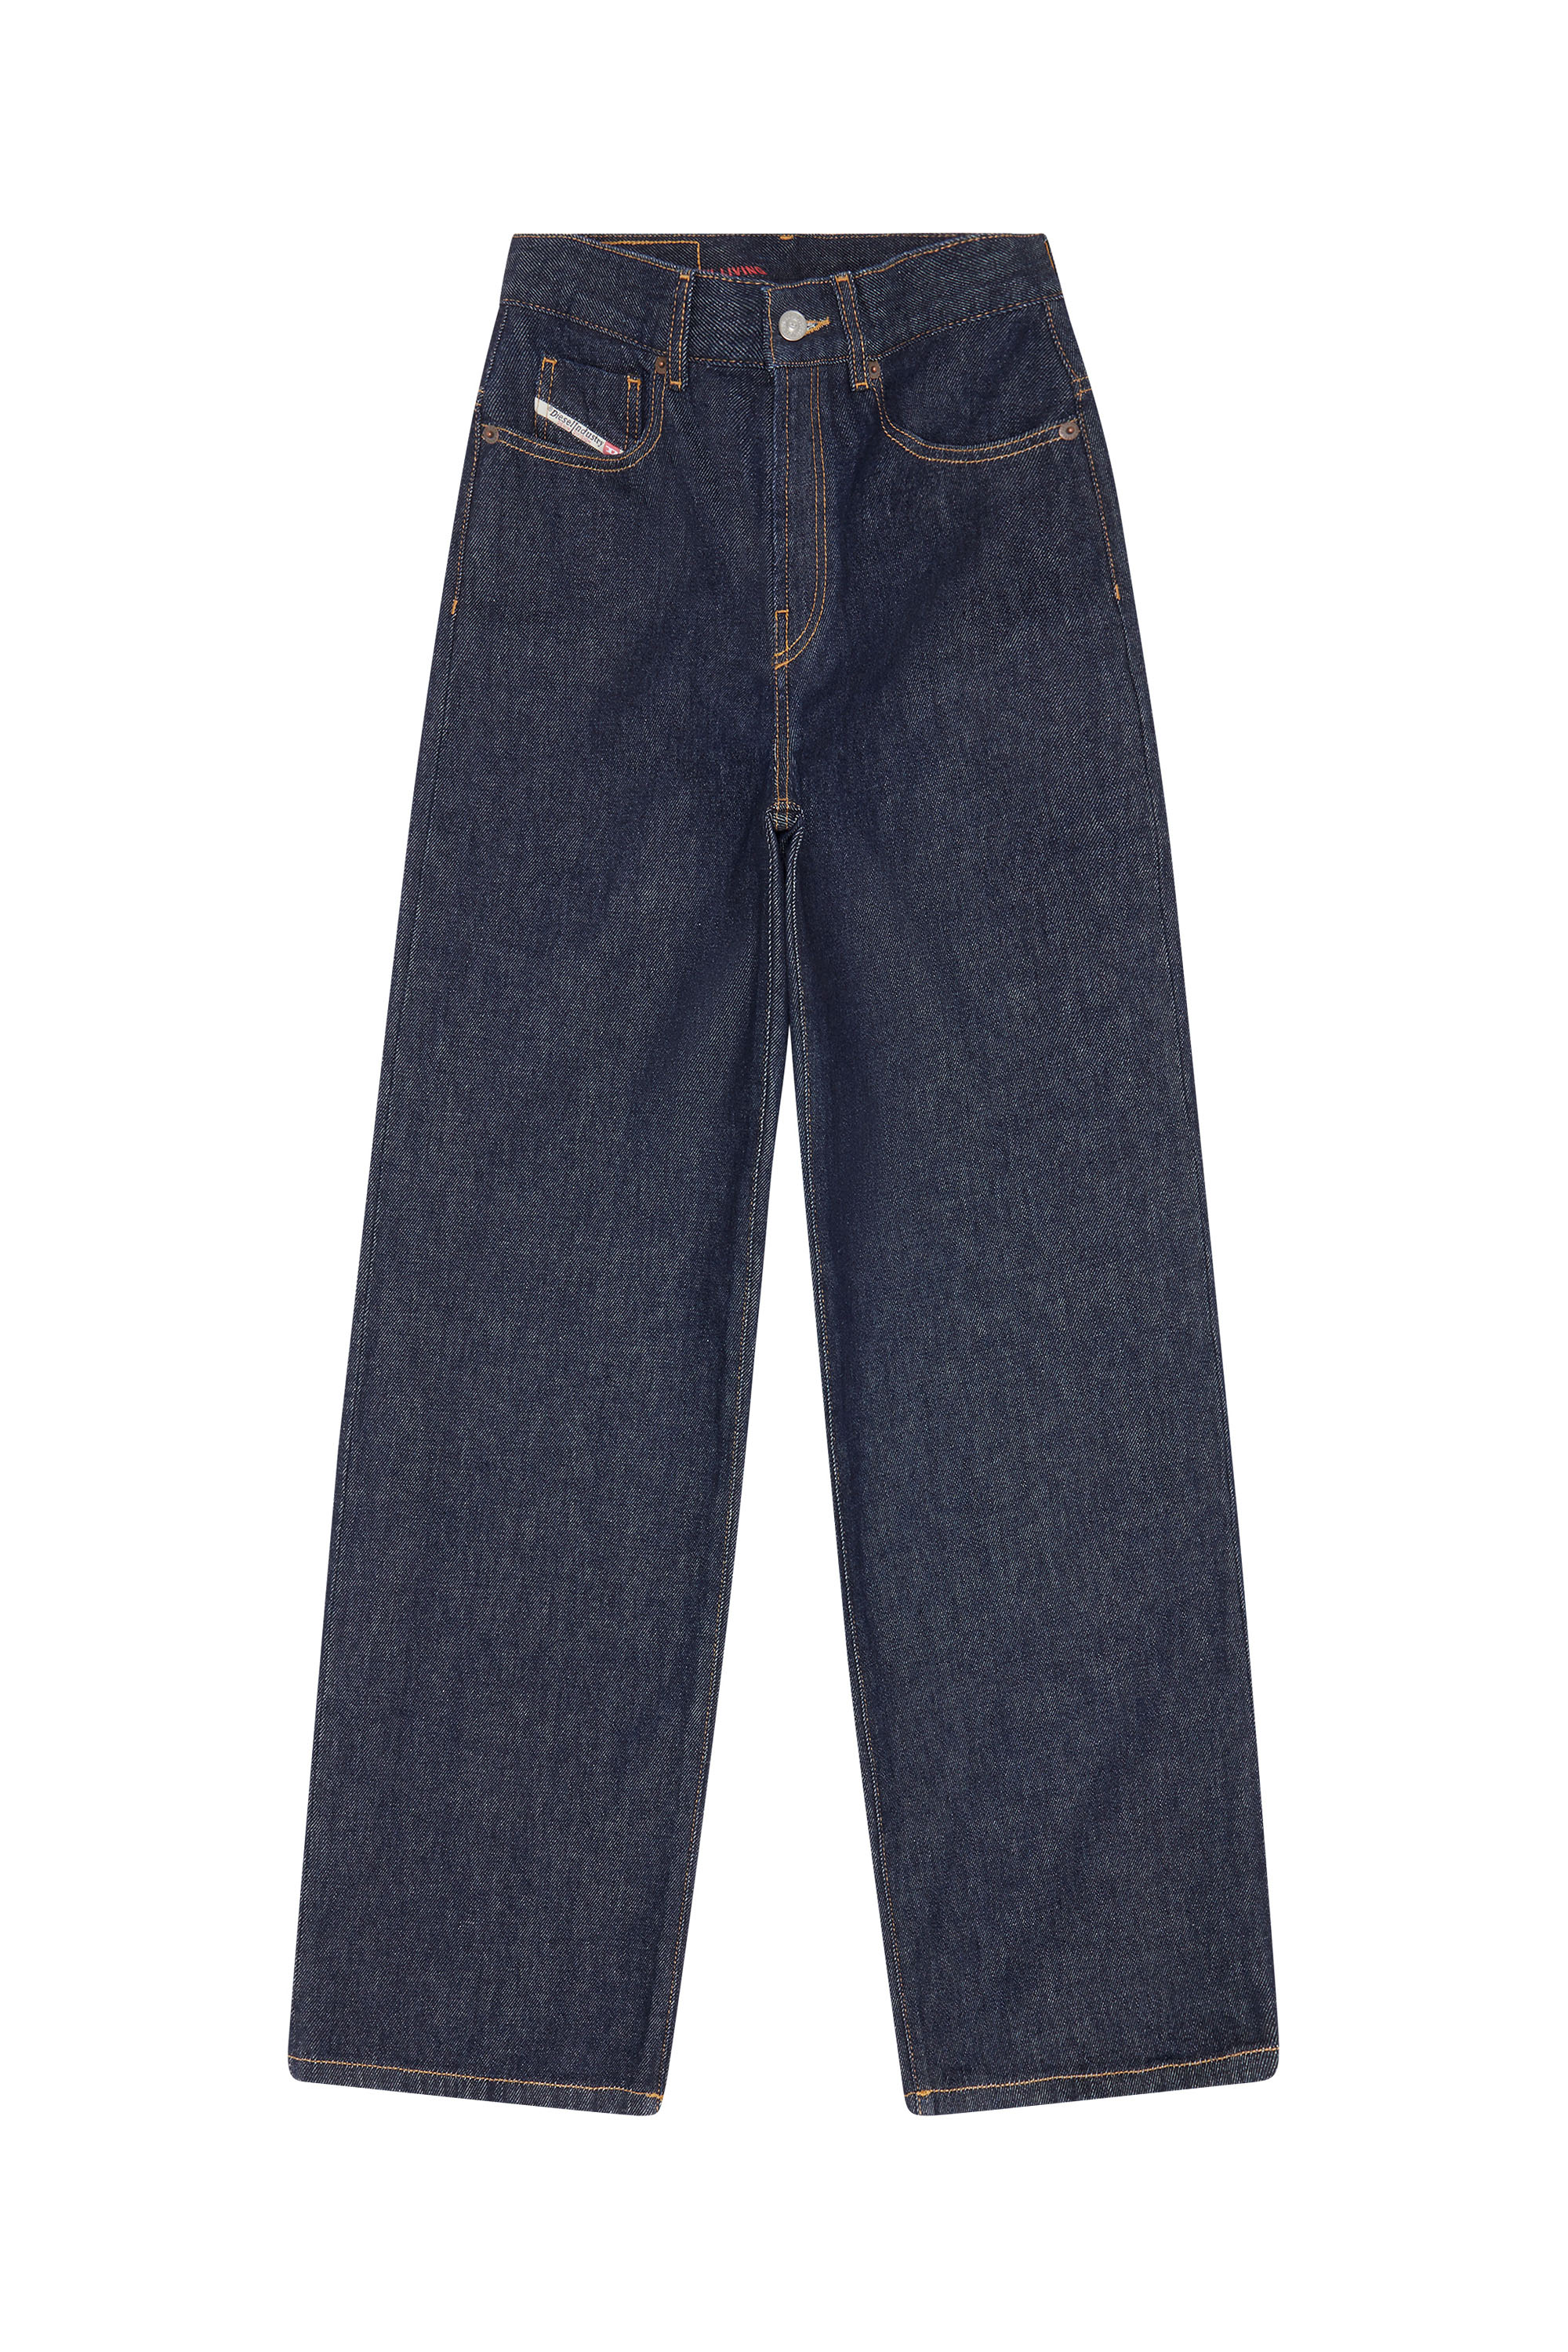 2000 Widee Z9C02 Bootcut and Flare Jeans, Dark Blue - Jeans